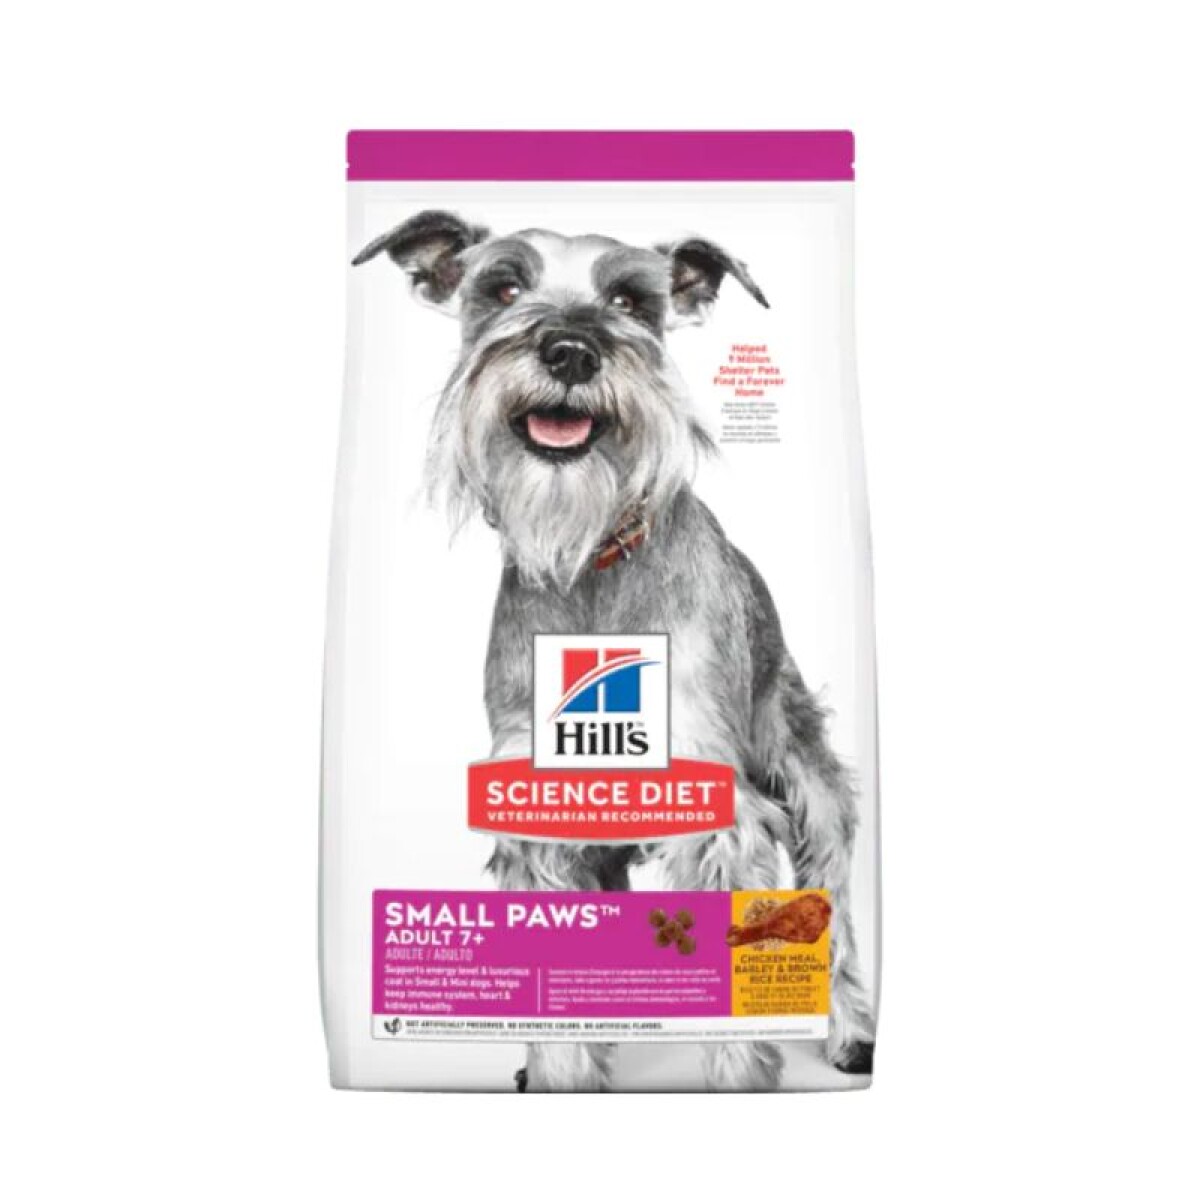 HILL´S CANINE ADULT 7+ SMALL PAWS 2.05KG - Hill´s Canine Adult 7+ Small Paws 2.05kg 